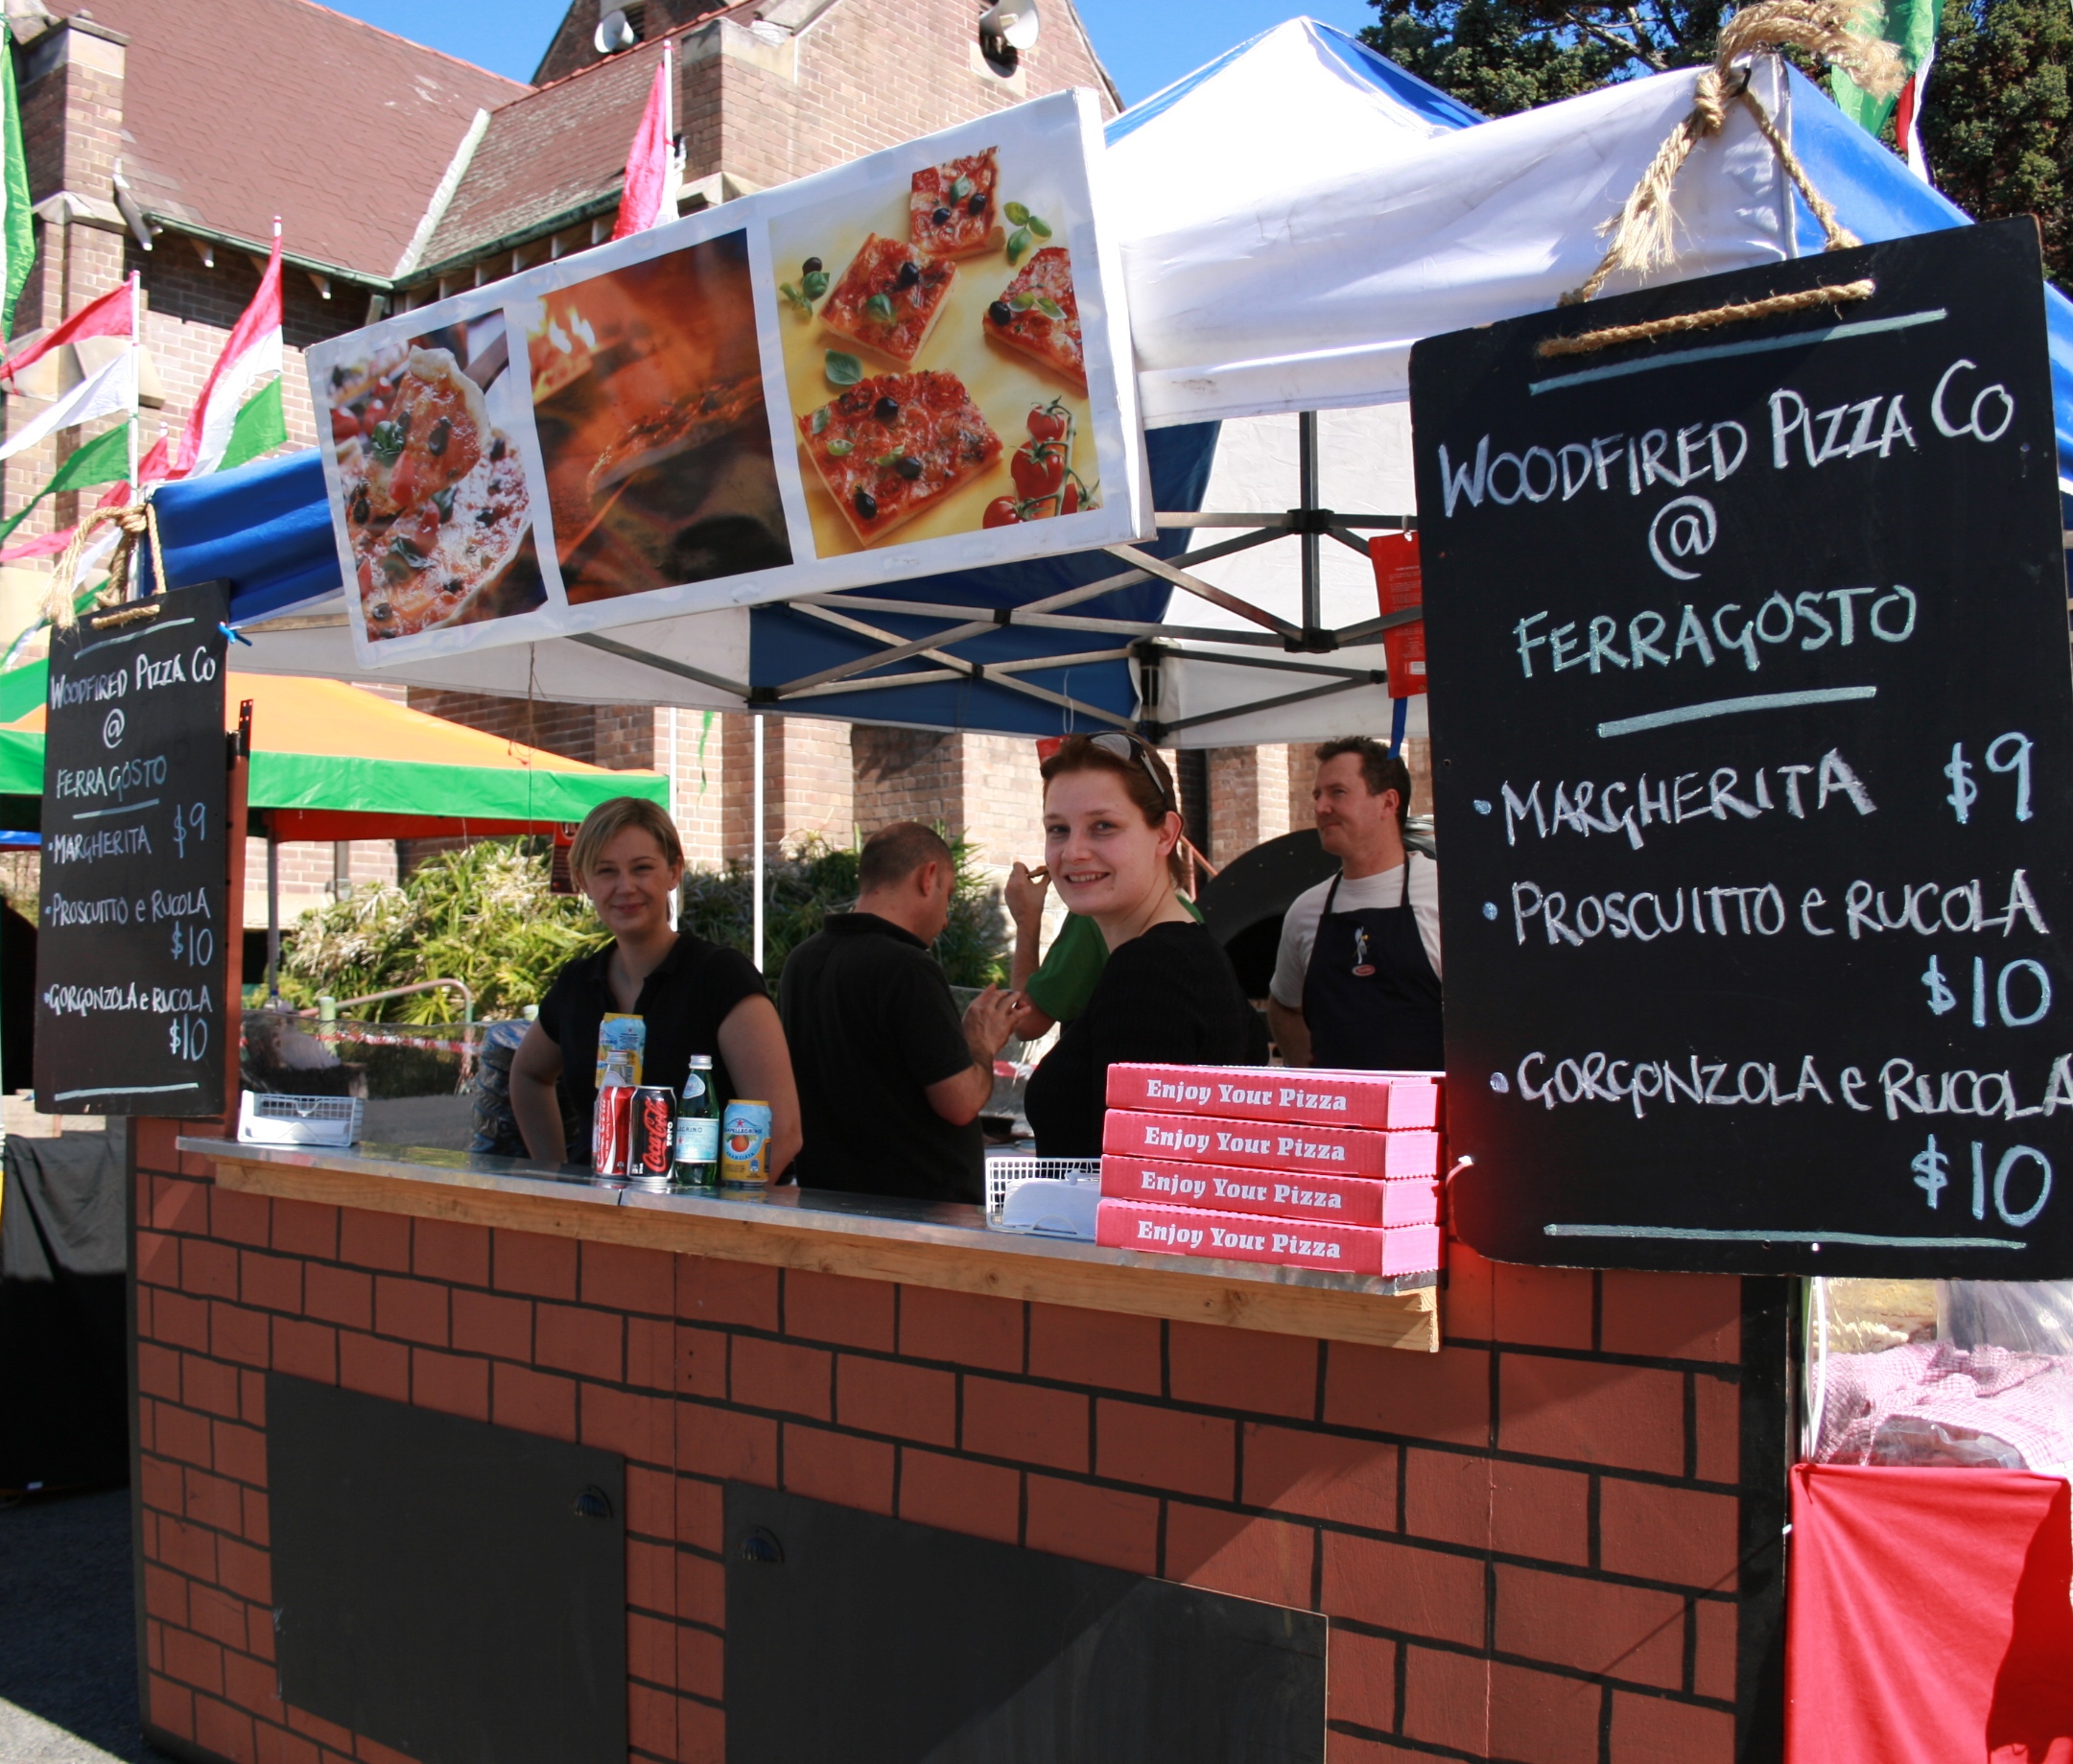 Woodfried pizza stall